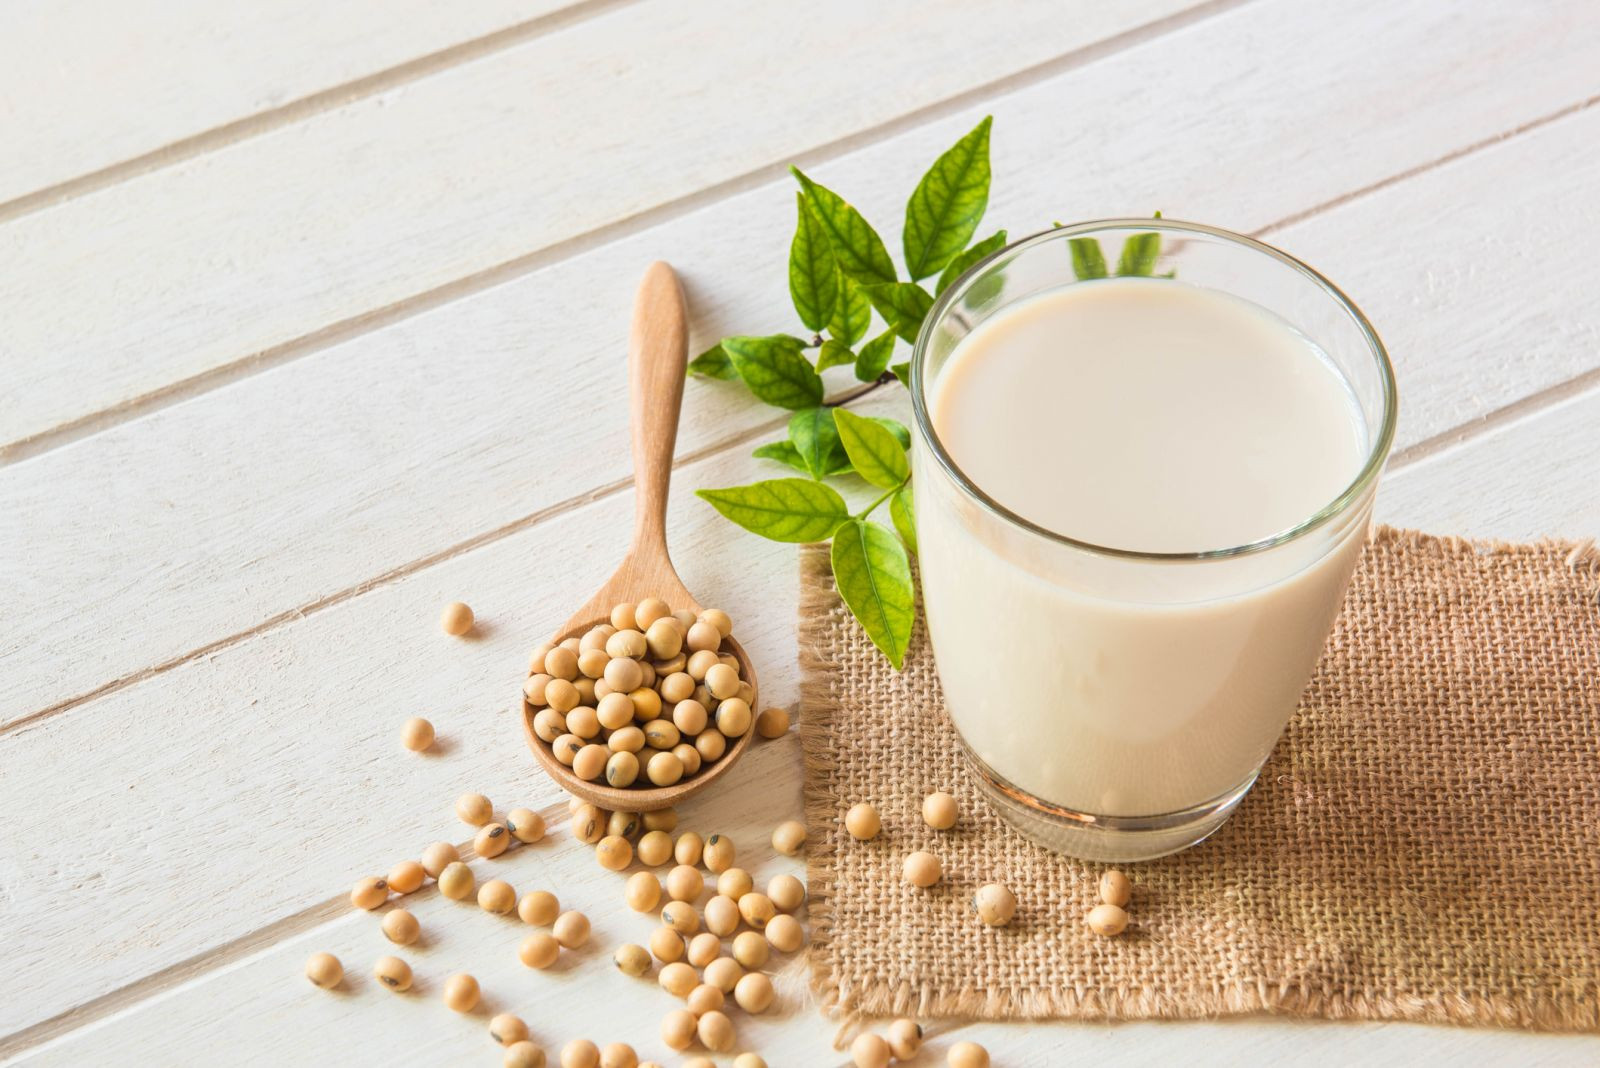 What Is the Impact of Soy in Your Diet on Cholesterol? Soy and soy-containing ingredients like tofu have gained popularity through the years for decreasing LDL cholesterol. Chief among those is the "terrible" form of cholesterol called low-density lipoprotein (LDL). This is the kind that reasons fatty deposits on the partitions of arteries, called plaque, main to atherosclerosis ("hardening of the arteries") and coronary artery disorder (CAD). Based on evidence that soy can reduce those dangers, the Food and Drug Administration (FDA) announced in 1999 that the coronary heart fitness benefits of soy will be promoted on product labels. That choice is now being questioned. This article takes a more in-depth observe the current debate, what the body of studies says, and what amount of soy can be doubtlessly useful if you have high LDL cholesterol. What Is Soy? Foods containing soy are derived from the soybean plant (Glycine max). Soy is a great supply of plant-based protein as well as calcium, fiber, potassium, magnesium, copper, manganese, and polyunsaturated fats like omega-3 fatty acids. Besides bringing protein into your eating regimen, soy also incorporates estrogen-like compounds referred to as isoflavones that have several health advantages. Among them, isoflavones have been touted by using a few for or her LDL cholesterol-reducing consequences (in particular seen in animal studies). Soy products, which include tofu, soy drinks, soybean burgers, and soy nuts, already have an established reputation for being a nutritious part of a balanced weight loss program, especially seeing that they provide a healthy alternative to animal protein. Can Soy Lower Cholesterol? Scientists have diagnosed one essential component in soybeans that appears to have the capacity to lessen cholesterol: soy protein. Even so, there stays debate as to how extensive the reduction is and whether it's far enough to justify the claim that soy is a heart-healthful food. Early Research A review of studies posted in Circulation in 2006 evaluated the effect of soybeans on levels of cholesterol-based totally on statistics from 22 human trials. What the researchers discovered became that soy protein, regardless of all the different components of soy, reduced LDL stages by using around 3%. Even so, the discount became taken into consideration low. Moreover, soy protein appears to have little to no effect on both "right" high-density lipoprotein (HDL) or "awful" triglycerides. The investigators also checked out the cholesterol-decreasing results of soy isoflavones and couldn't locate any evidence that they helped in any manner. Due to the inconsistency of outcomes from human trials, the FDA announced in 2017 that it changed to reassessing its 1999 decision to allow producers to make coronary heart fitness claims approximately soy. A decision has yet to be announced Fildena 150mg or Vidalista 60. Reevaluation of Studies Subsequent research posted in the Journal of the American Heart Association in 2019 contested the FDA's selection to oppose its stance on soy. The researcher from the University of Toronto's Department of Nutritional Science argued that the LDL reduction prompted with the aid of soy, whilst low, remained consistent over many years and nicely in the threshold mounted via the FDA. The FDA's choice to review its 1999 ruling changed primarily based on conflicting proof from 46 randomized controlled studies. The researchers in Toronto took it upon themselves to re-examine those research and observed that, after 14 years, the reduction in LDL amongst have a look at individuals remained properly inside the goals set by the FDA. The FDA's 1999 ruling changed based totally on proof that soy protein ought to lower LDL by using 4.2 and 6.7 milligrams in step with deciliter (mg/dL) of blood. According to the Univerity of Toronto researchers, the average LDL discount within 14 years because of the FDA ruling becomes 6.3 mg/dL. The researchers further argued that reversing the 1999 ruling could unfairly goal soy when different foods with similarly modest cholesterol‐decreasing results (which include oats, psyllium, barley, and nuts) are allowed to be touted as "coronary heart-wholesome. Can Herbs and Supplements Lower Cholesterol? At present, there may be no exchange within the FDA's suggestions concerning the inclusion of soy in a coronary heart-healthful diet. According to the FDA, everyday consumption of 25 grams (g) or greater of soy protein is related to a discounted risk of atherosclerosis and CAD. Some studies have counseled that 50 g or greater consistent with the day is needed to acquire a useful effect. Even so, it's miles critical not to overstate the benefits of soy in lowering your hazard of atherosclerosis or CAD. Generally speaking, the hazard of CAD increases when your LDL stages are 160 mg/dL or higher. While a reduction of 6.3 mg/dL is not insignificant, it's miles never a brief restoration if you have high cholesterol. Rather, soy needs to be taken into consideration as part of a holistic approach to lowering your LDL cholesterol level, which ought to additionally contain ordinary workout, weight loss if essential, and a low-fat food plan with minimal saturated fats. Summary Although the FDA allowed producers of sure soy products to make heart fitness claims back in 1999, the evidence assisting their LDL cholesterol-reducing effects remains shaky. Because of this, the FDA has considered whether or not to oppose its ruling. Proponents argue that, whilst the discount of "awful" LDL cholesterol is simple, the effect appears to be durable and does no longer lessen soy's advantage in a coronary heart-healthy diet. The debate maintains Fildena. Despite the small decreases in cholesterol levels, soy remains a super alternative to animal fats which are acknowledged to elevate blood levels of cholesterol. In addition, soy merchandise are excessive in fiber and low in saturated fats, both of that are critical to a coronary heart-wholesome food plan.